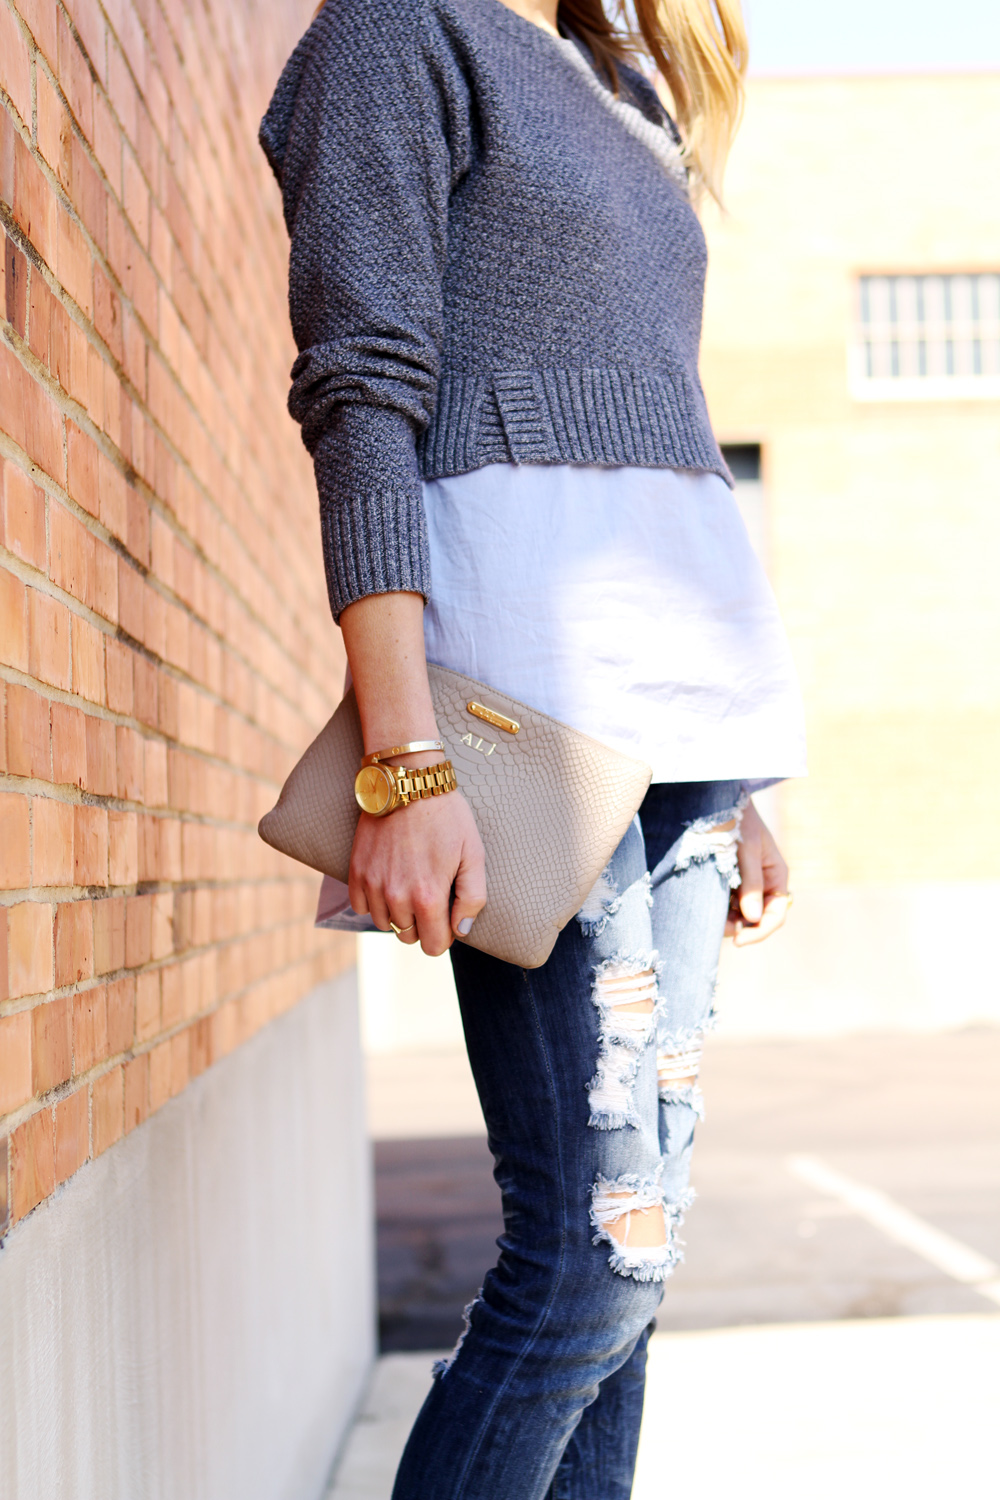 banana-republic-tweed-layered-pullover, denim distressed jeans, blue mirrored sunglasses, nude pumps, nude clutch